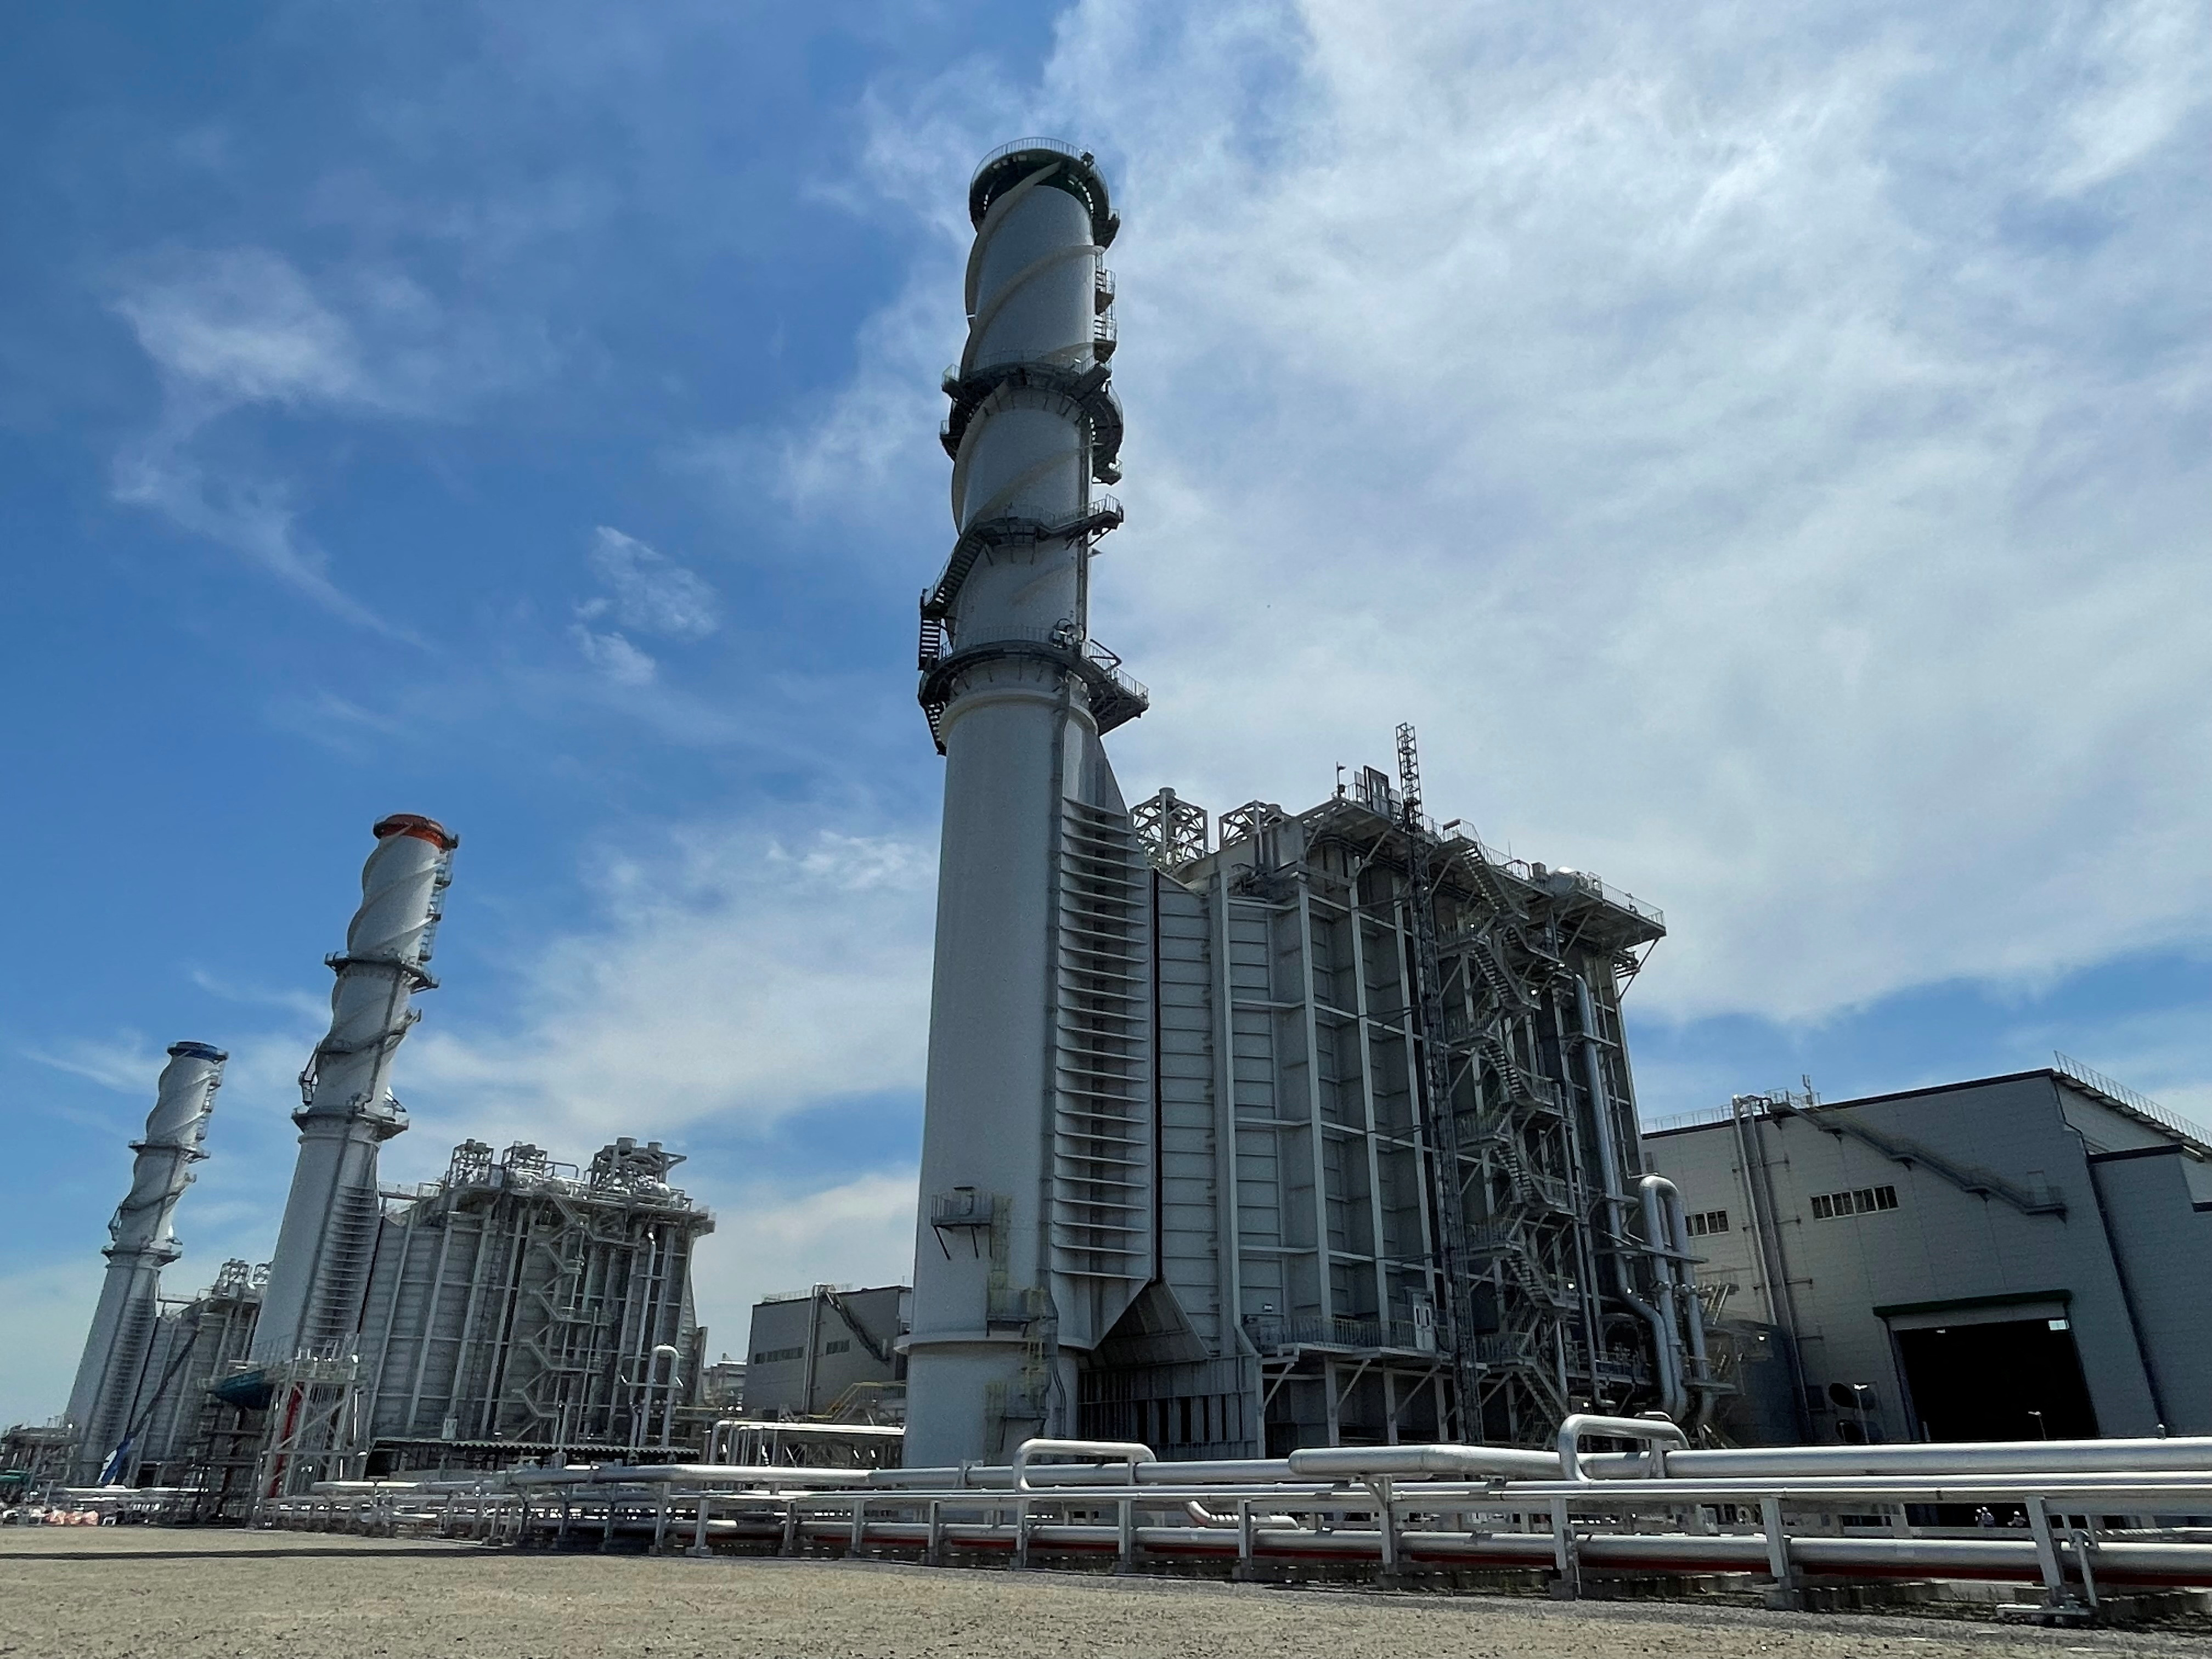 Japan’s biggest power generator, JERA, is preparing to start operations of new 2.34 gigawatts (GW) gas-fired power plants, in Chiba